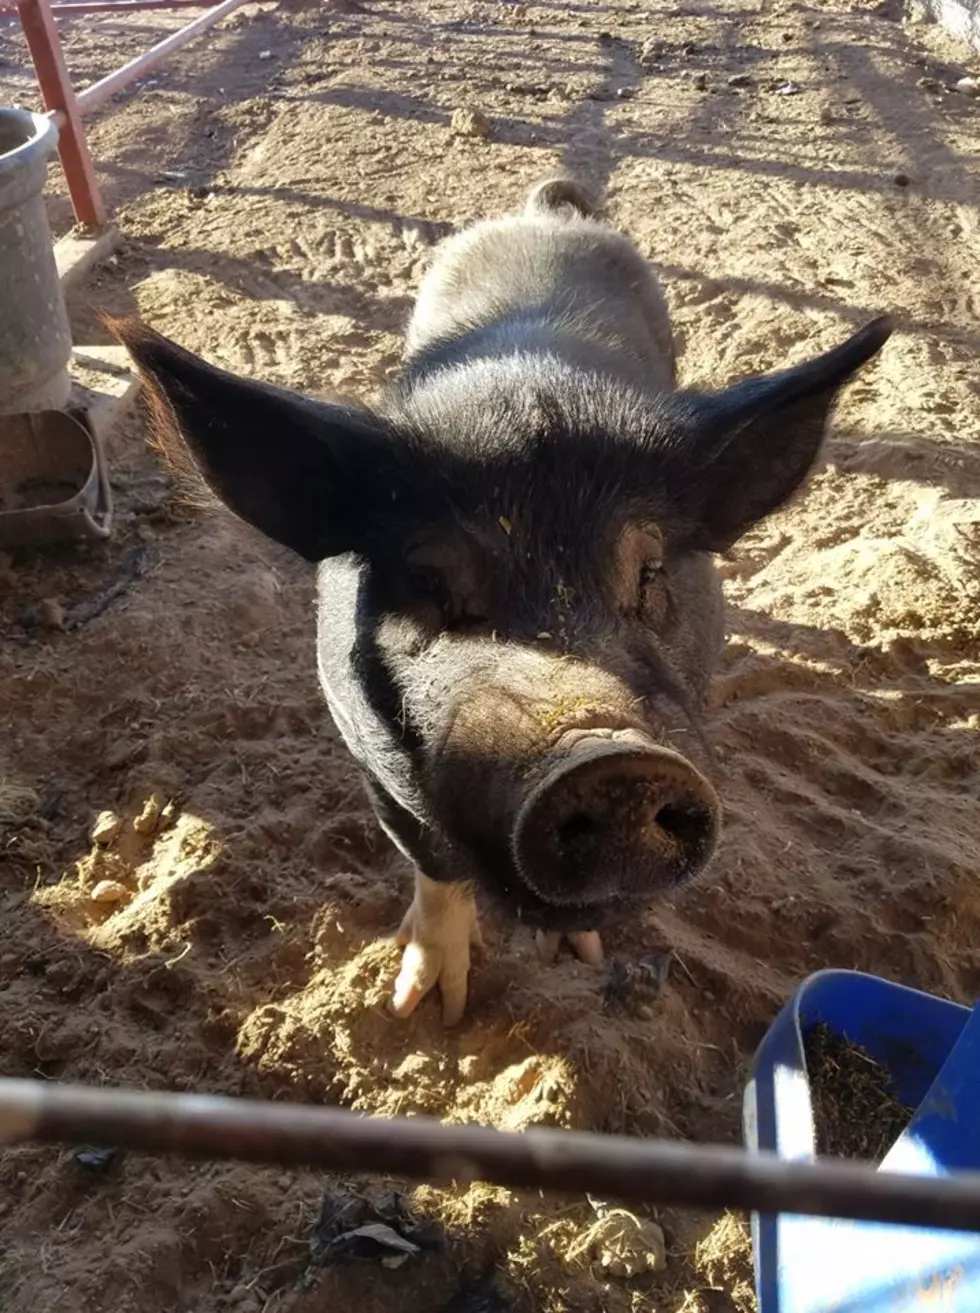 Missing A Pig In Amarillo? Sheriff’s Dept. Wants To Give It Back